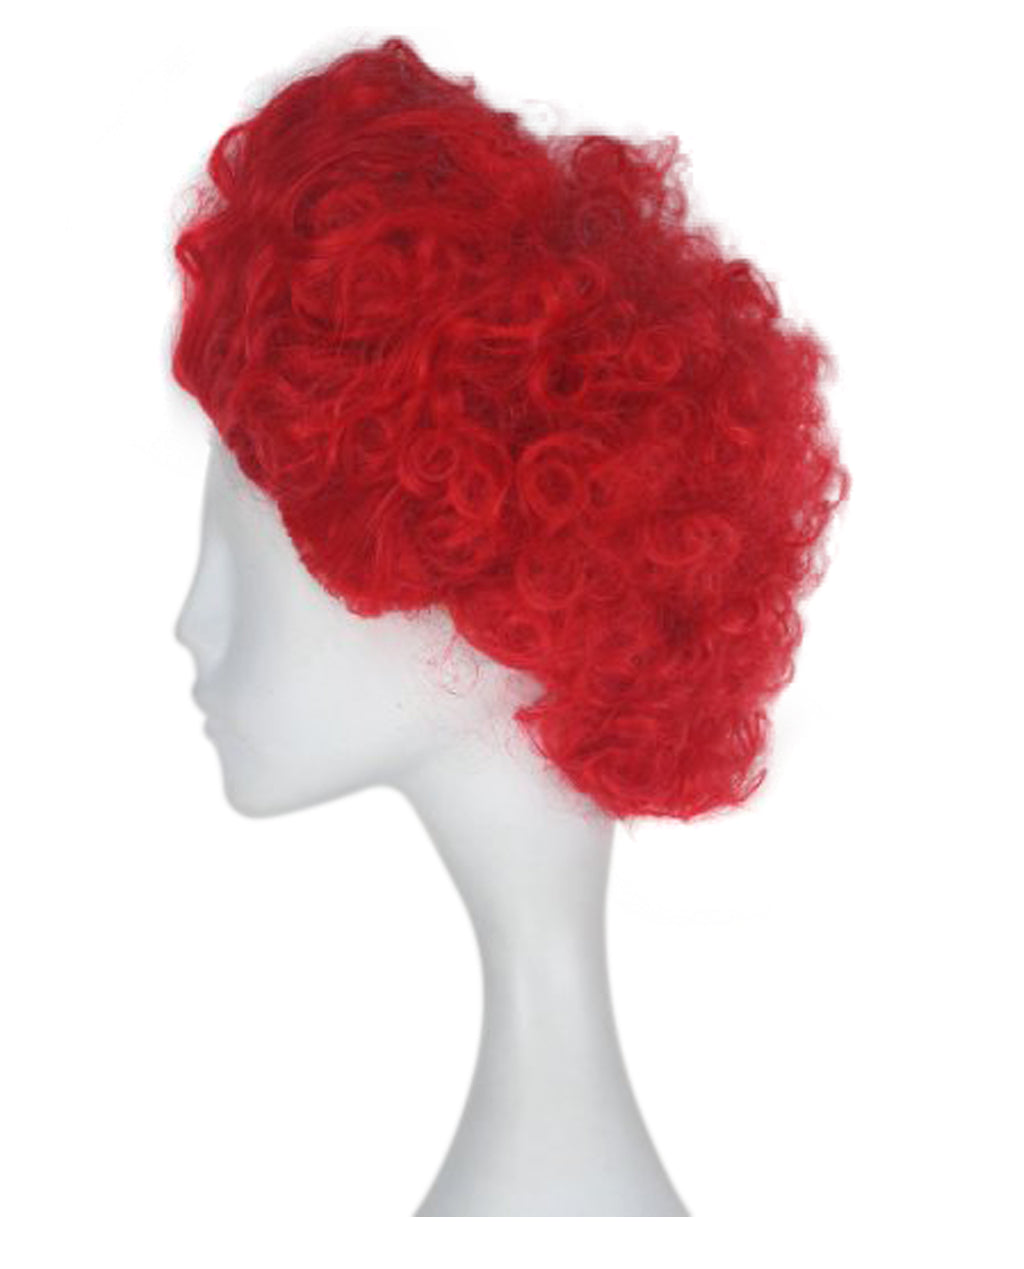 Red Queen of Alice Through The Looking Glass Costume Wig